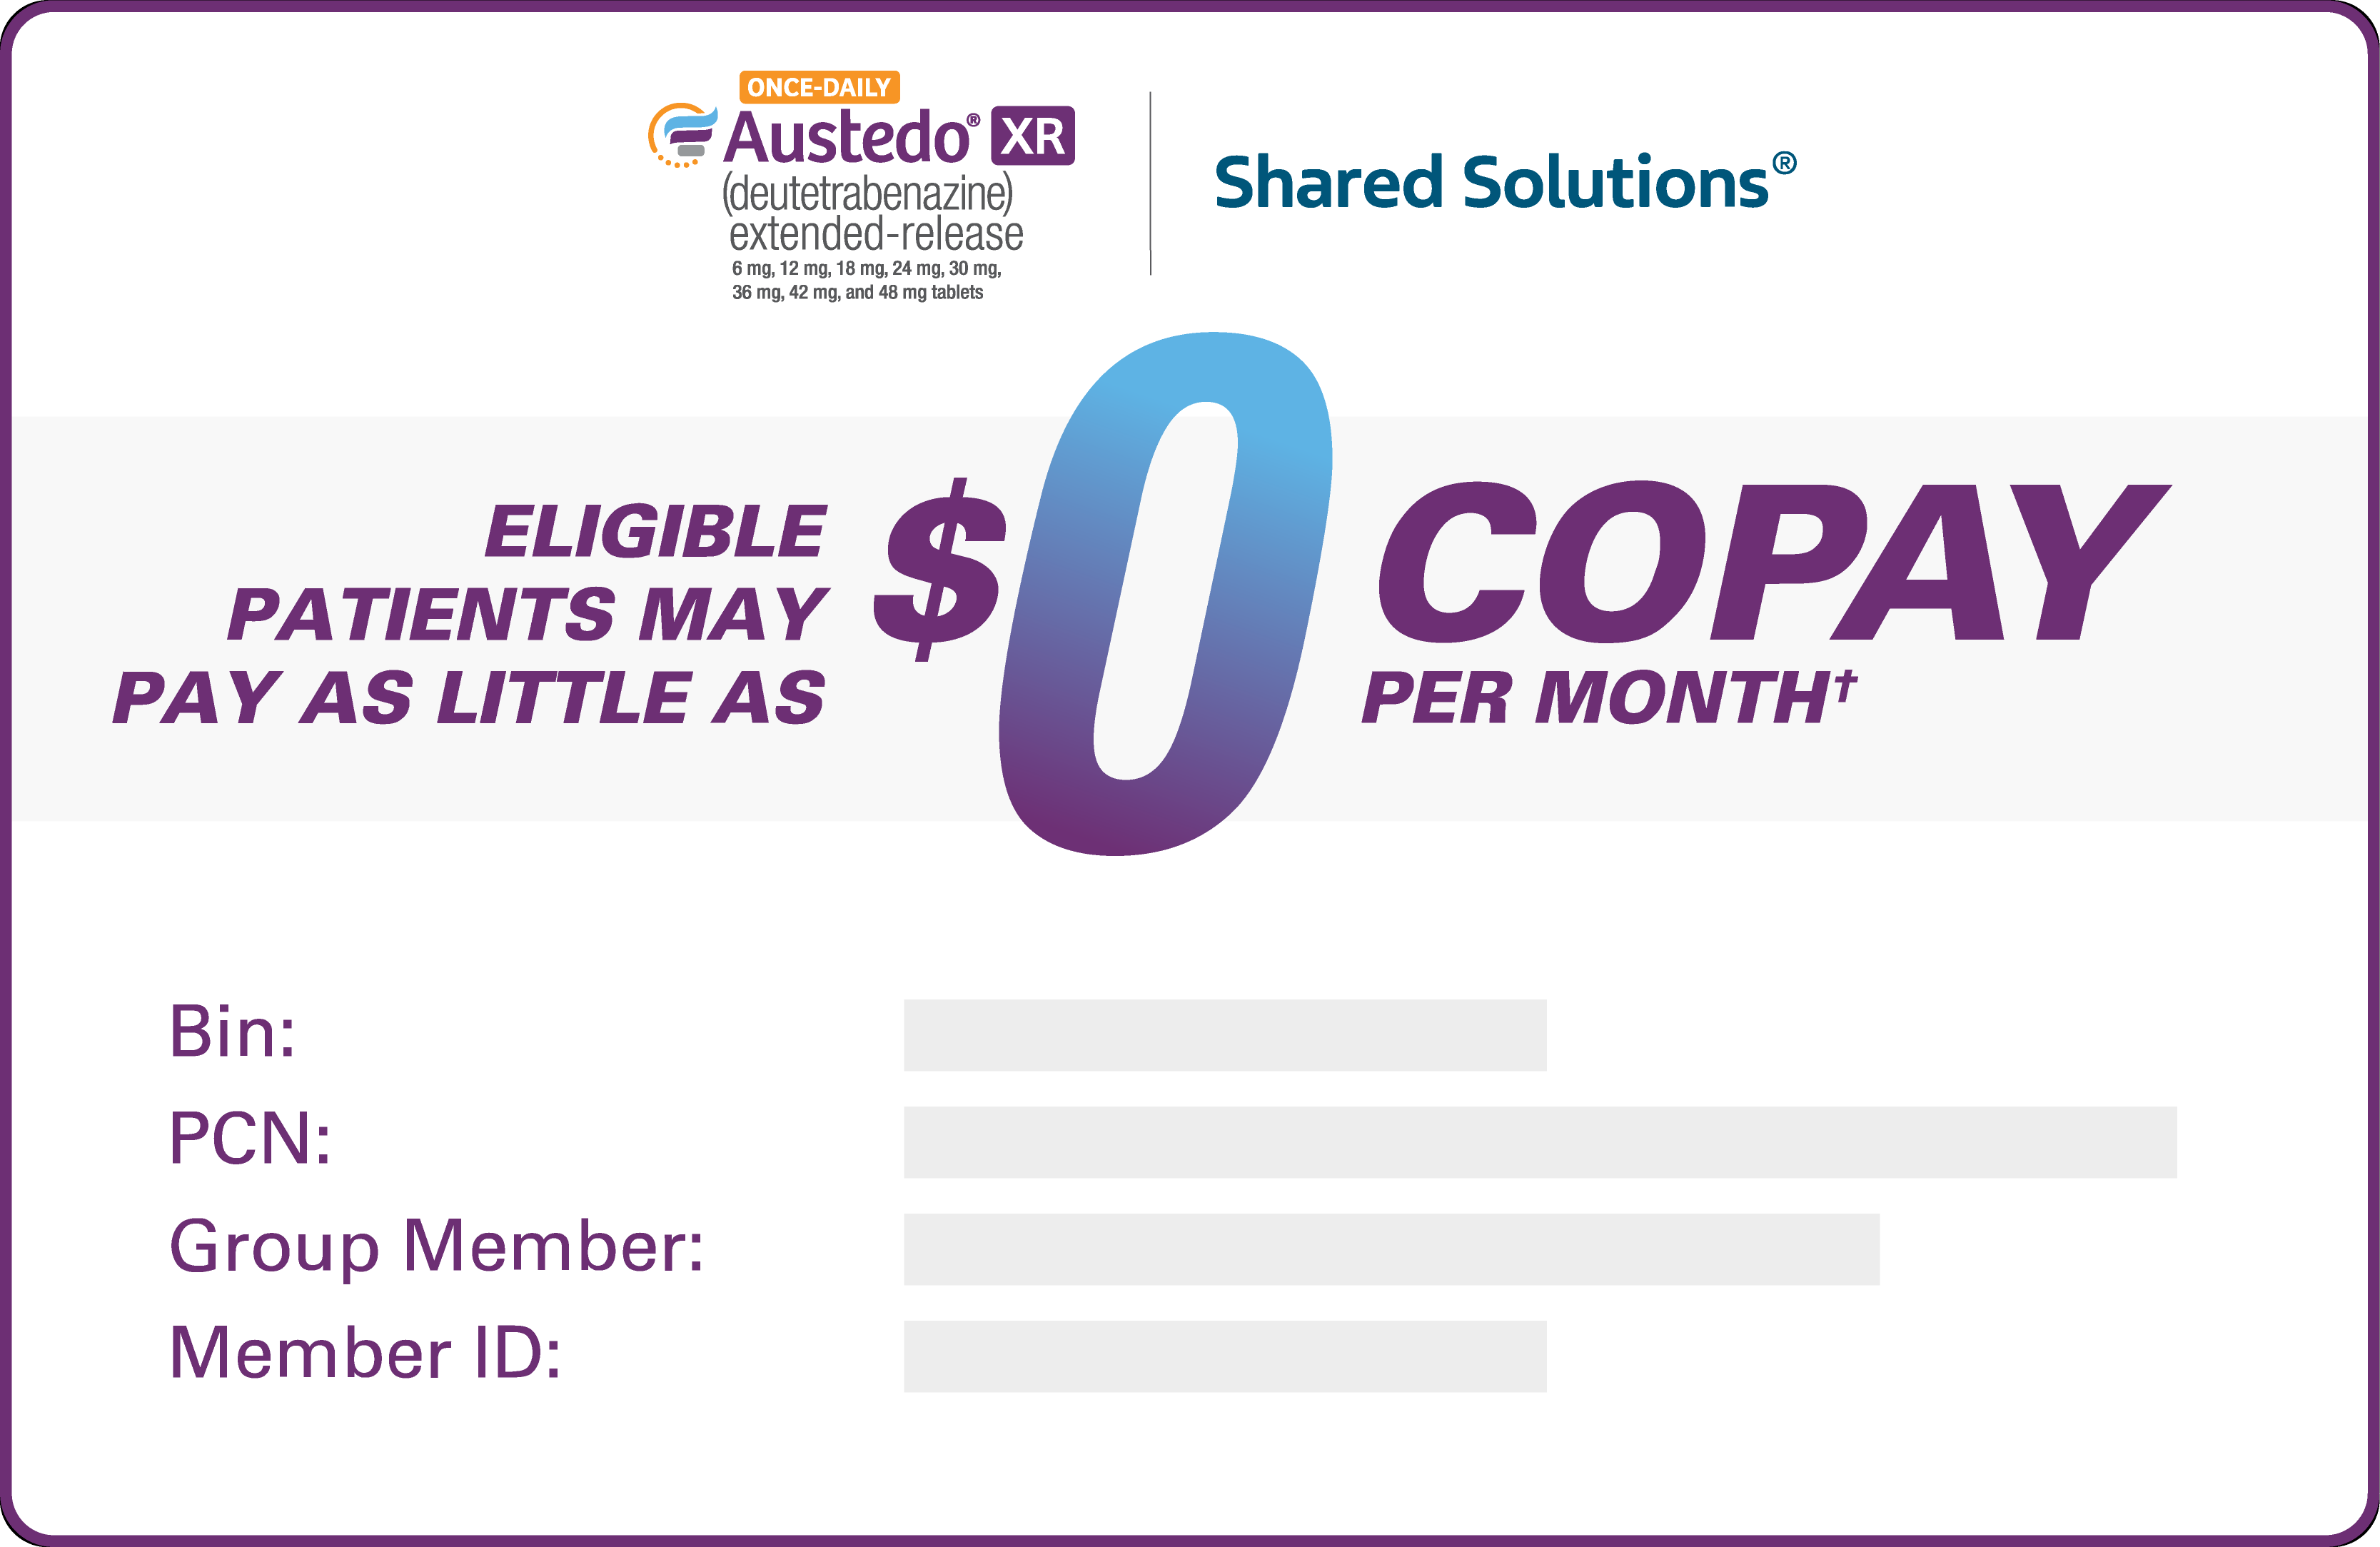 30 days free trial voucher for new patients card and $0 copay per month card.